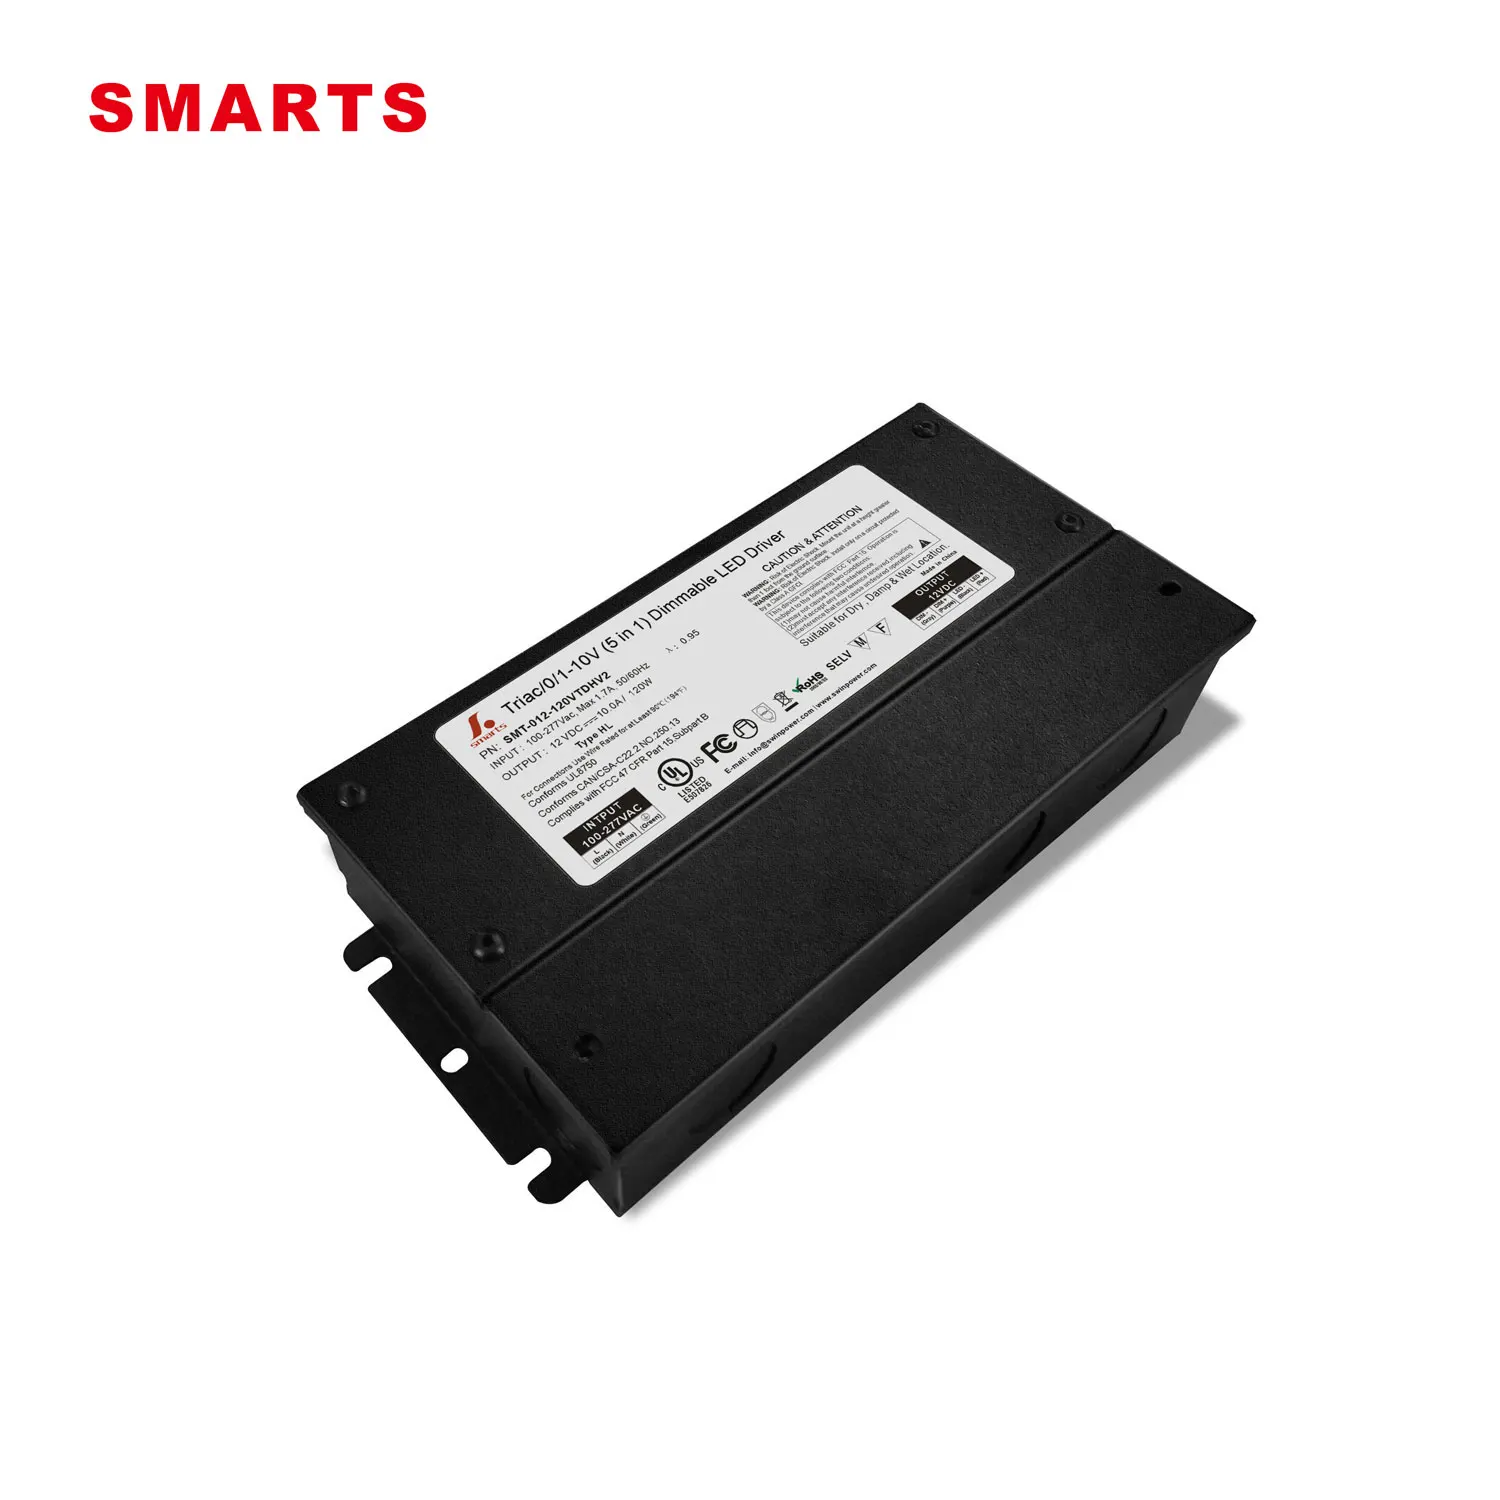 12v 120w constant voltage power supply for Led strip 5 en 1 dimmable led driver